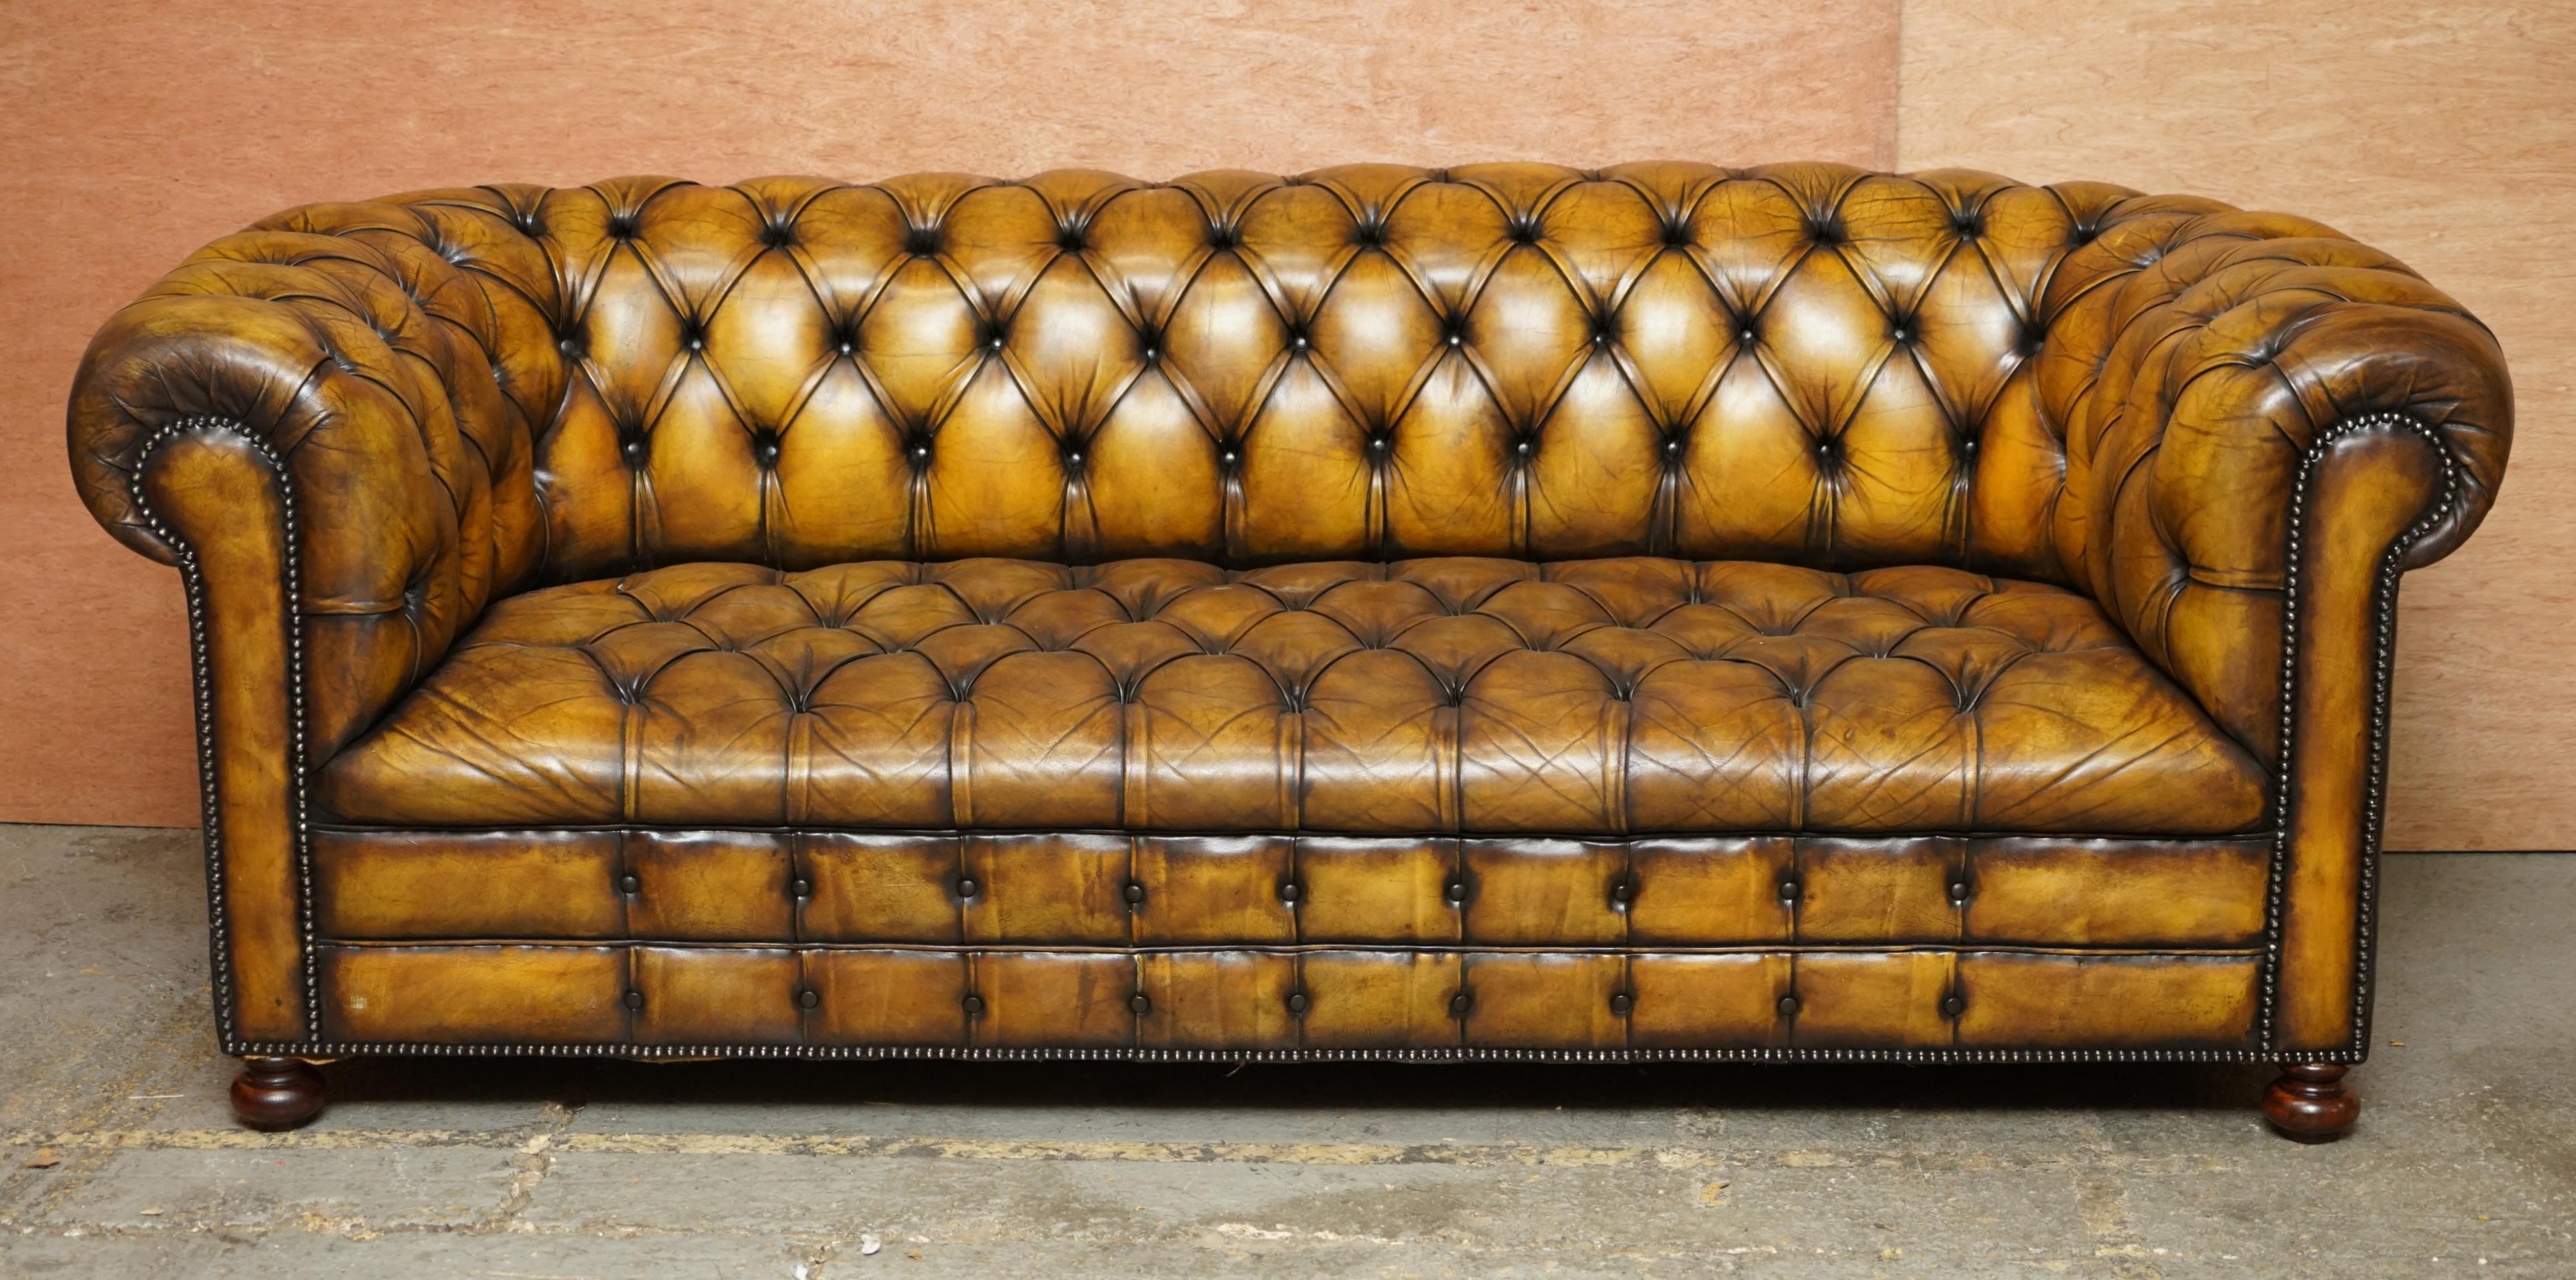 We are delighted to offer for sale this original Art Deco circa 1920's Whisky brown leather Chesterfield club sofa in restored condition with fully buttoned base 

This is a very good find, you almost never come across early 20th century